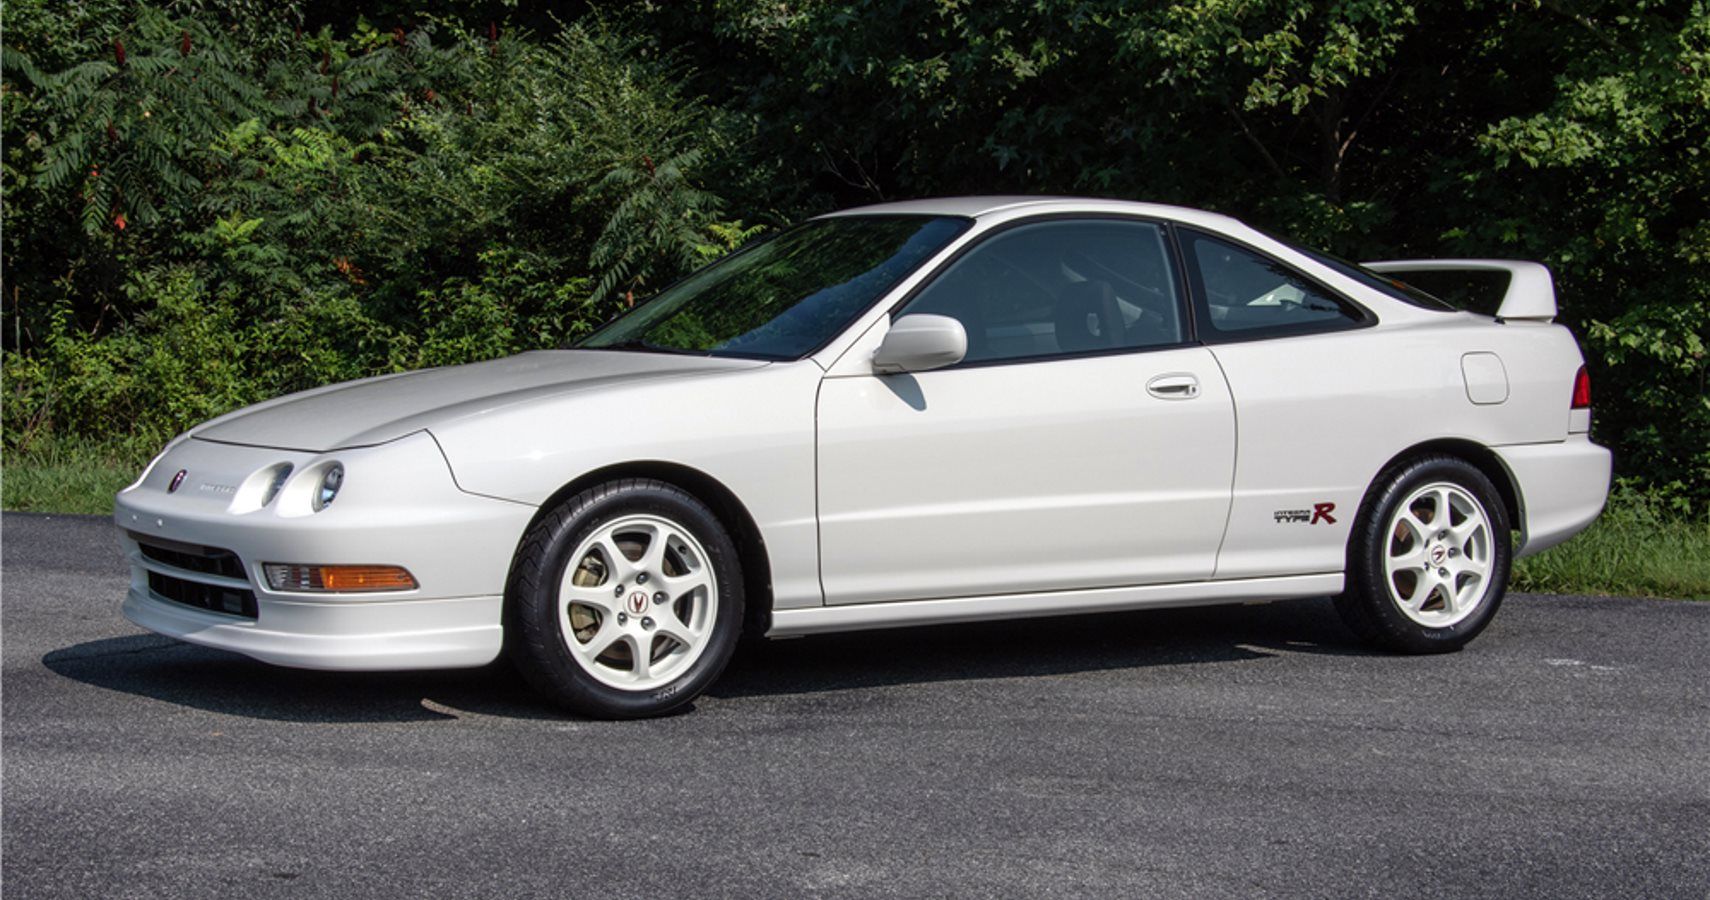 Classic 1997 Acura Integra Type R Sells For Big Money At Auction